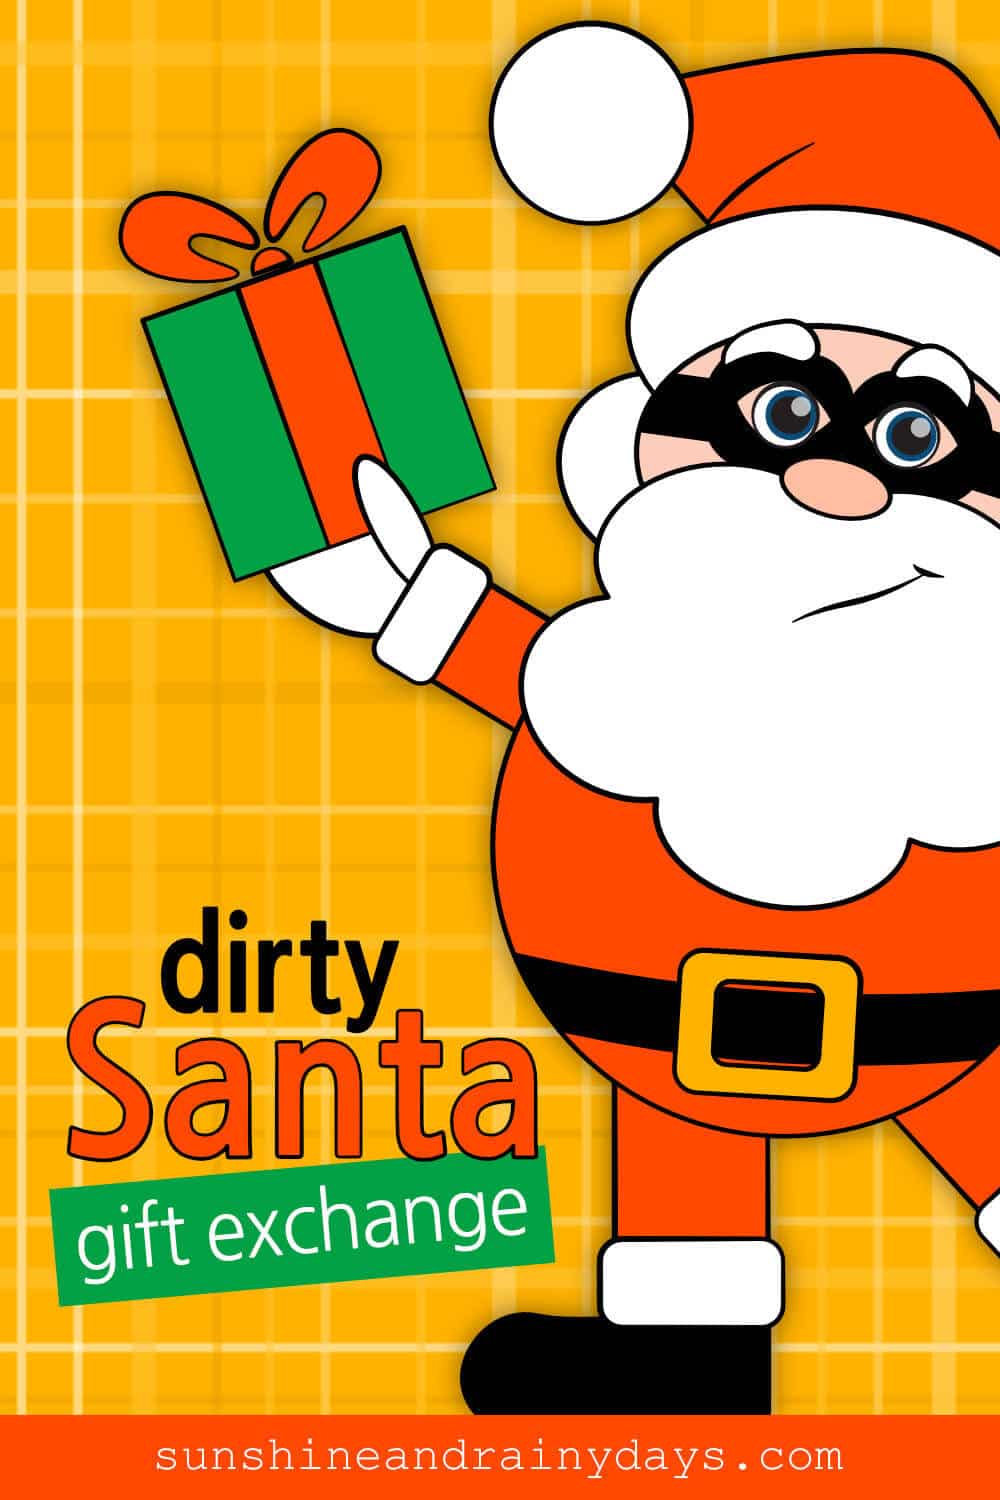 Dirty Santa in a thief mask with the words: Dirty Santa Gift Exchange